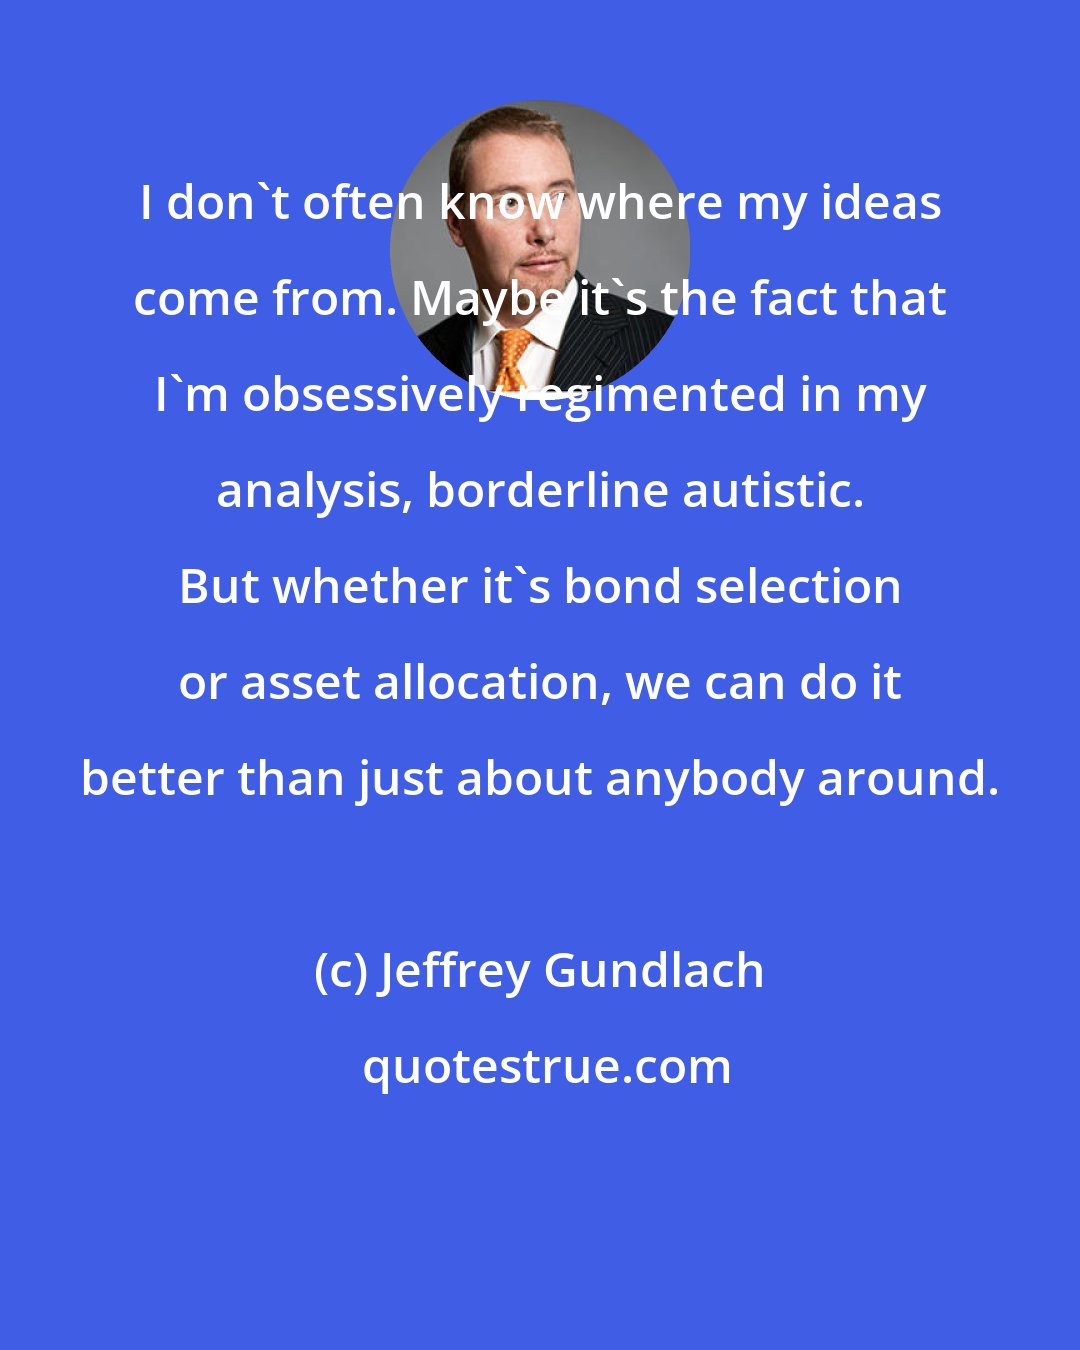 Jeffrey Gundlach: I don't often know where my ideas come from. Maybe it's the fact that I'm obsessively regimented in my analysis, borderline autistic. But whether it's bond selection or asset allocation, we can do it better than just about anybody around.